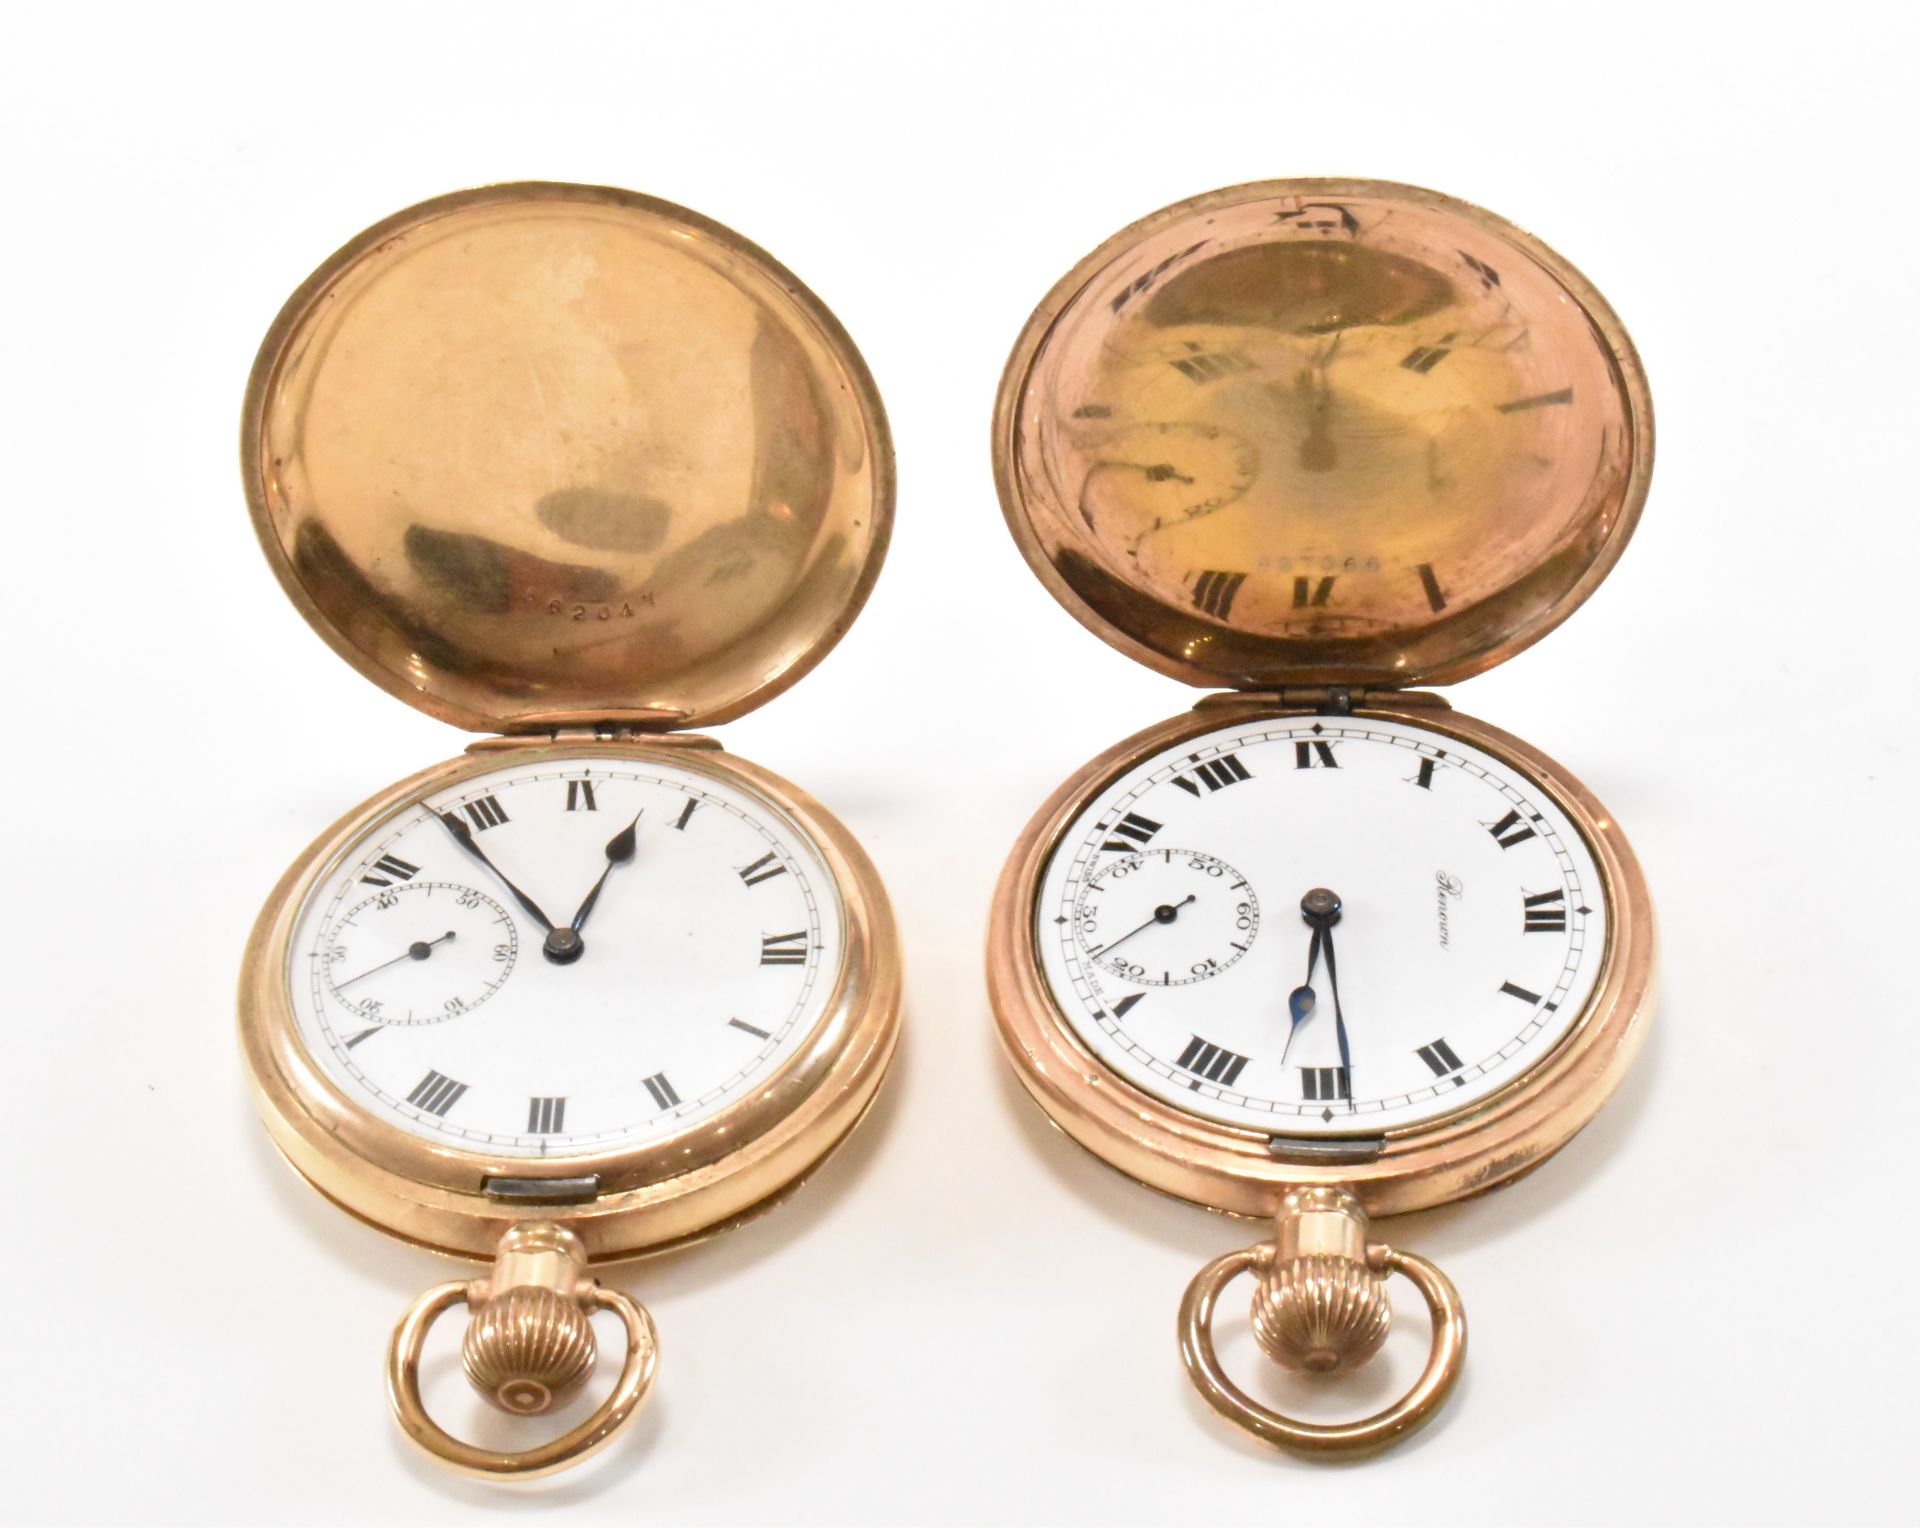 TWO GOLD PLATED FULL HUNTER POCKET WATCHES - Image 2 of 4